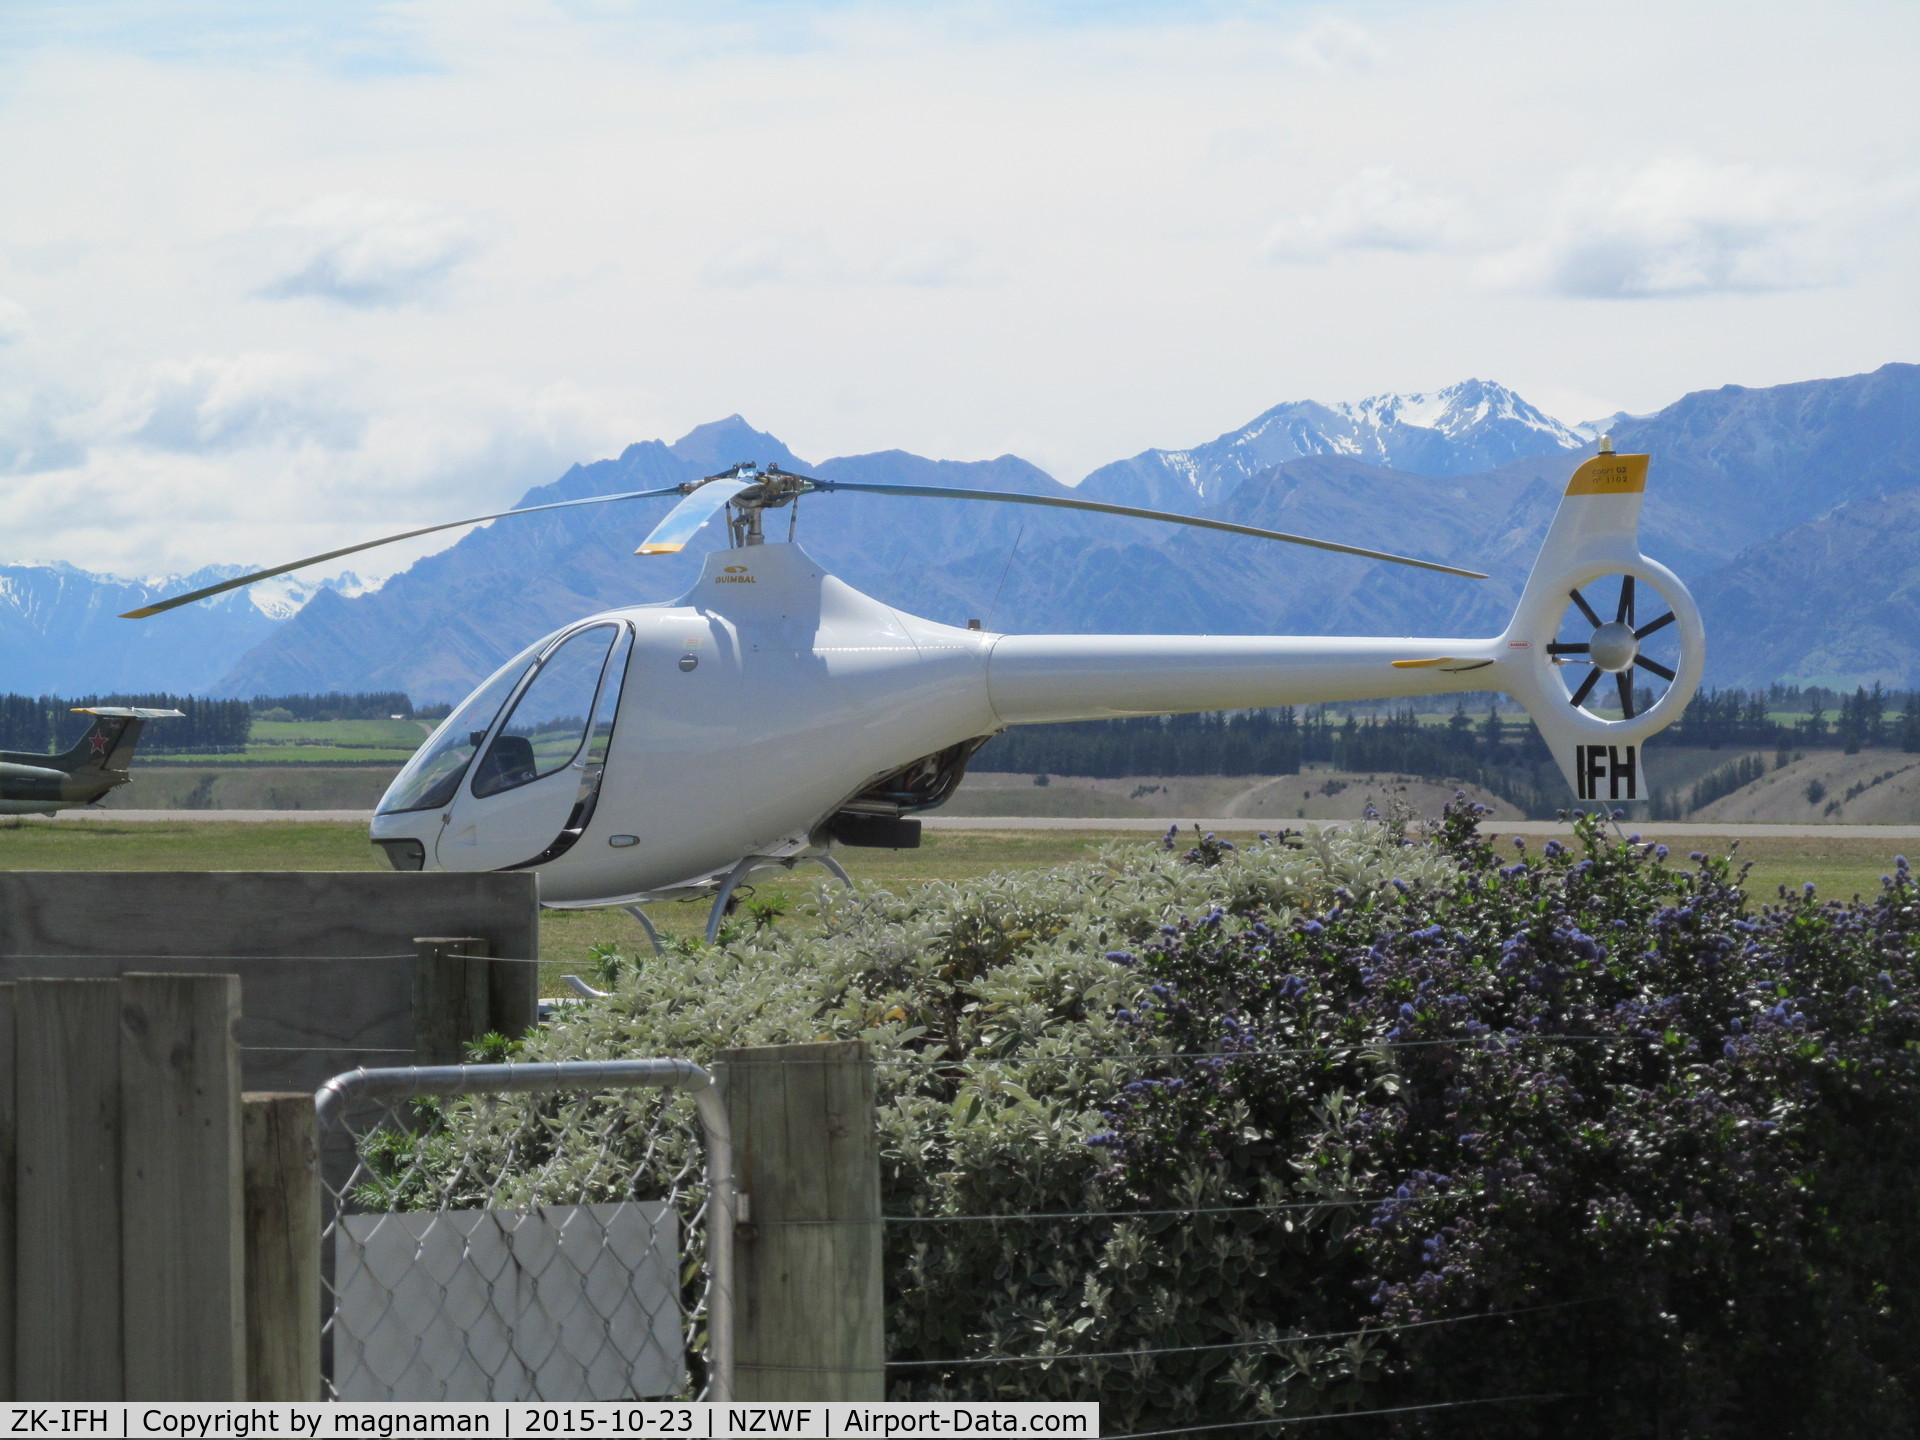 ZK-IFH, Guimbal Cabri G2 C/N 1102, new to NZ